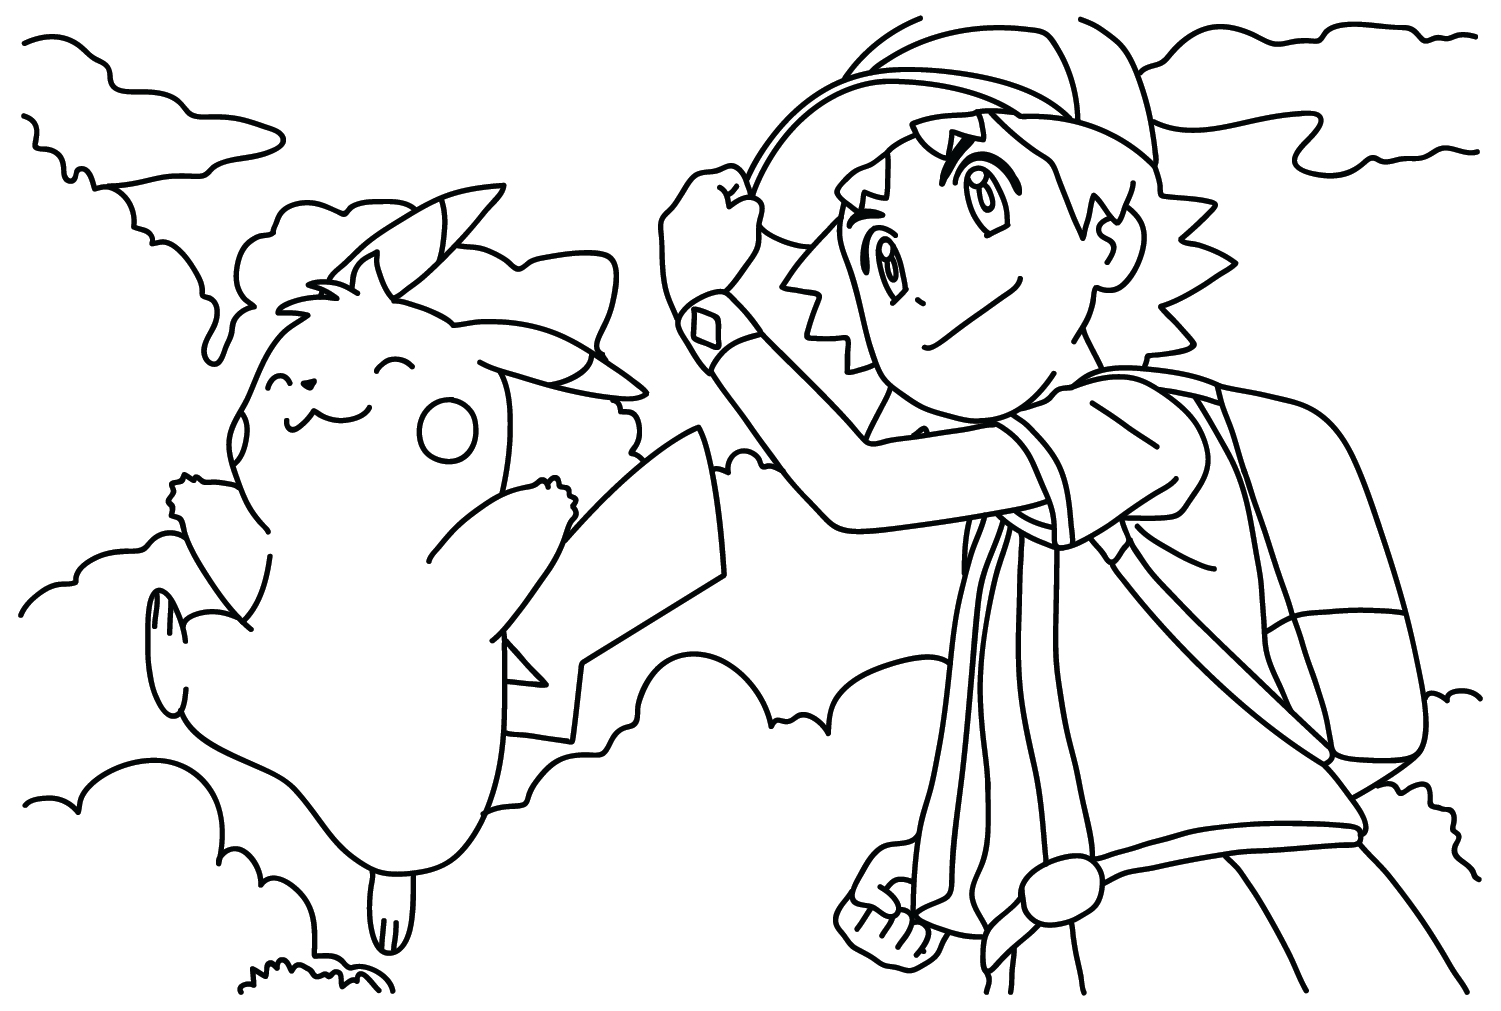 Ritchie Pikachu Pokemon Pictures to Color